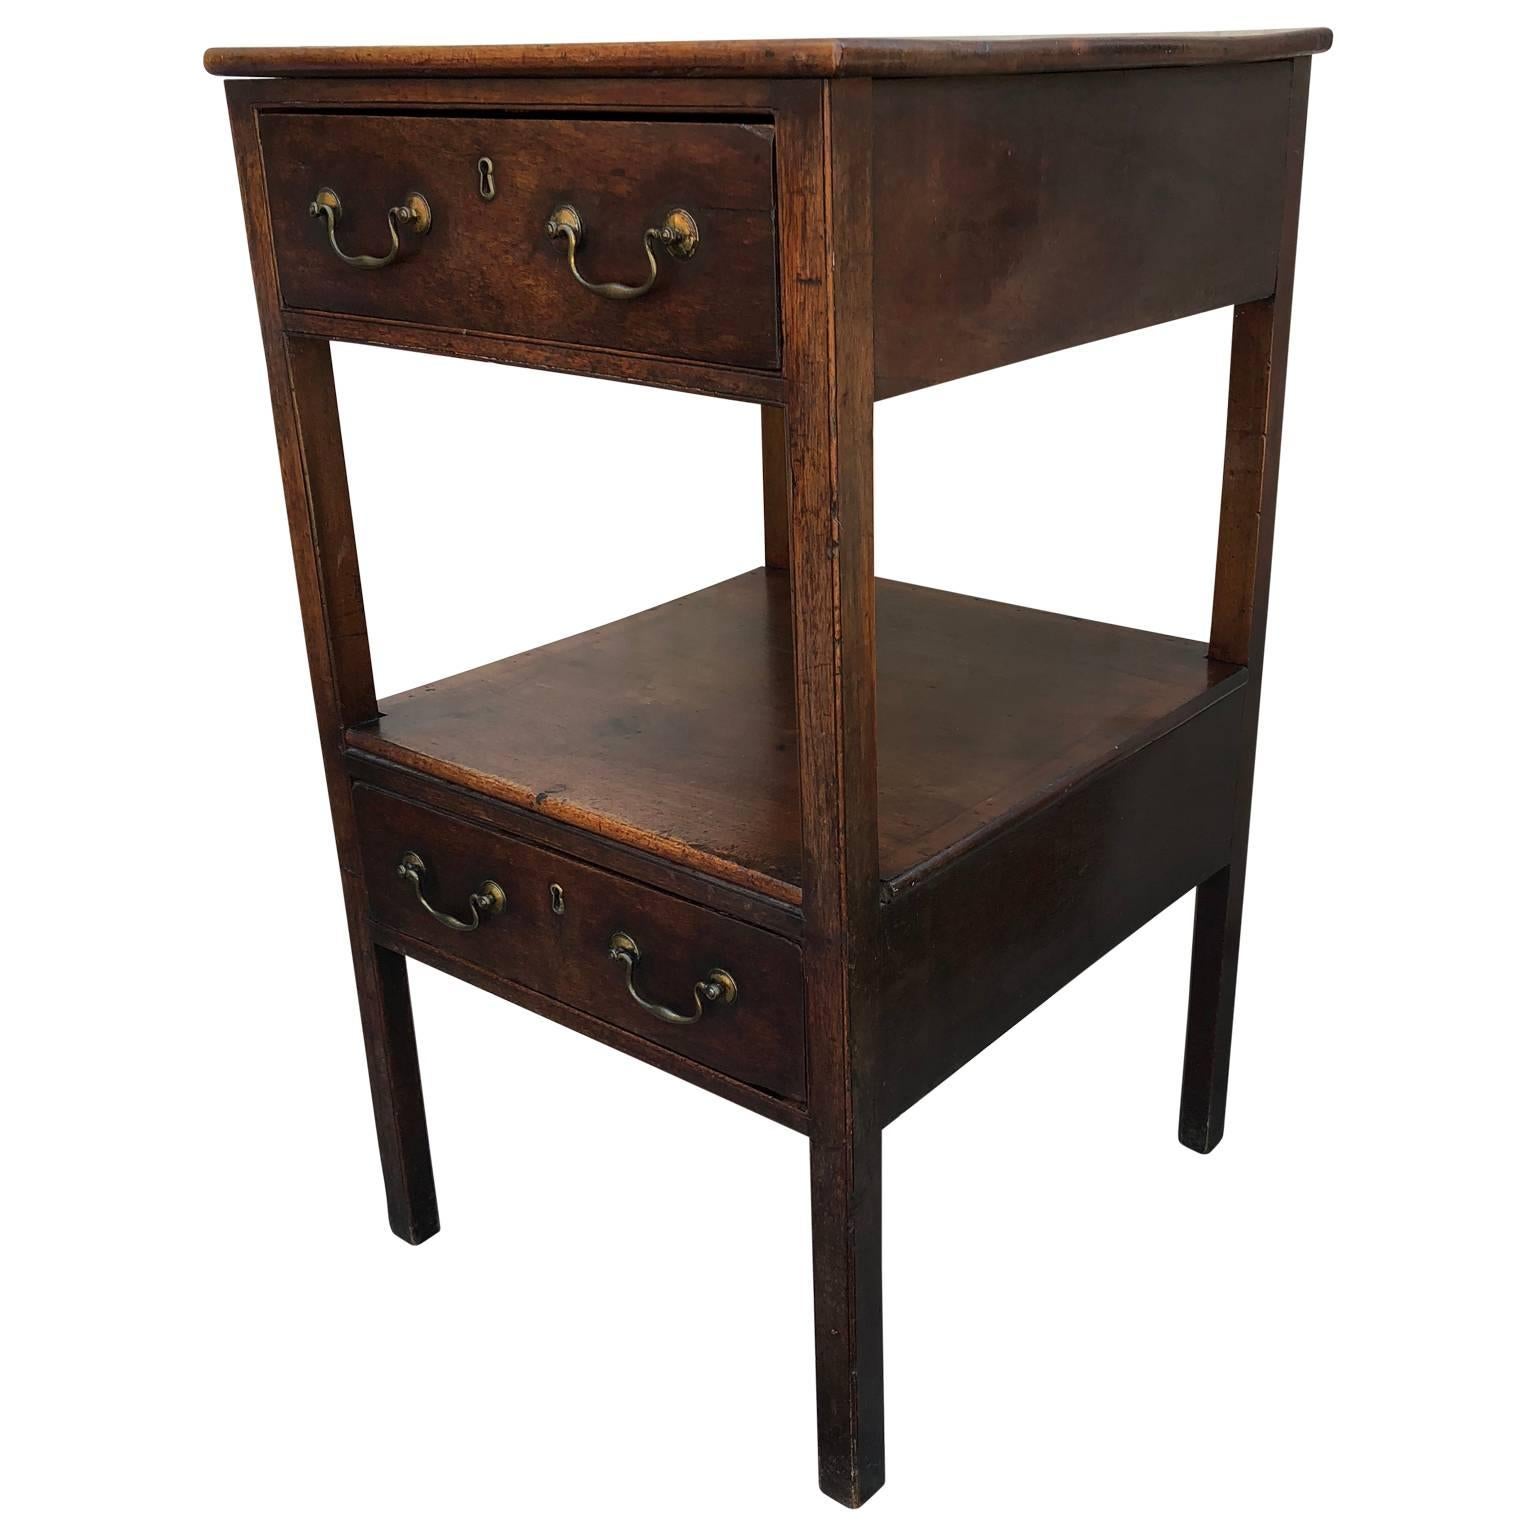 19th Century Tall Two-Drawer Desk or Chest